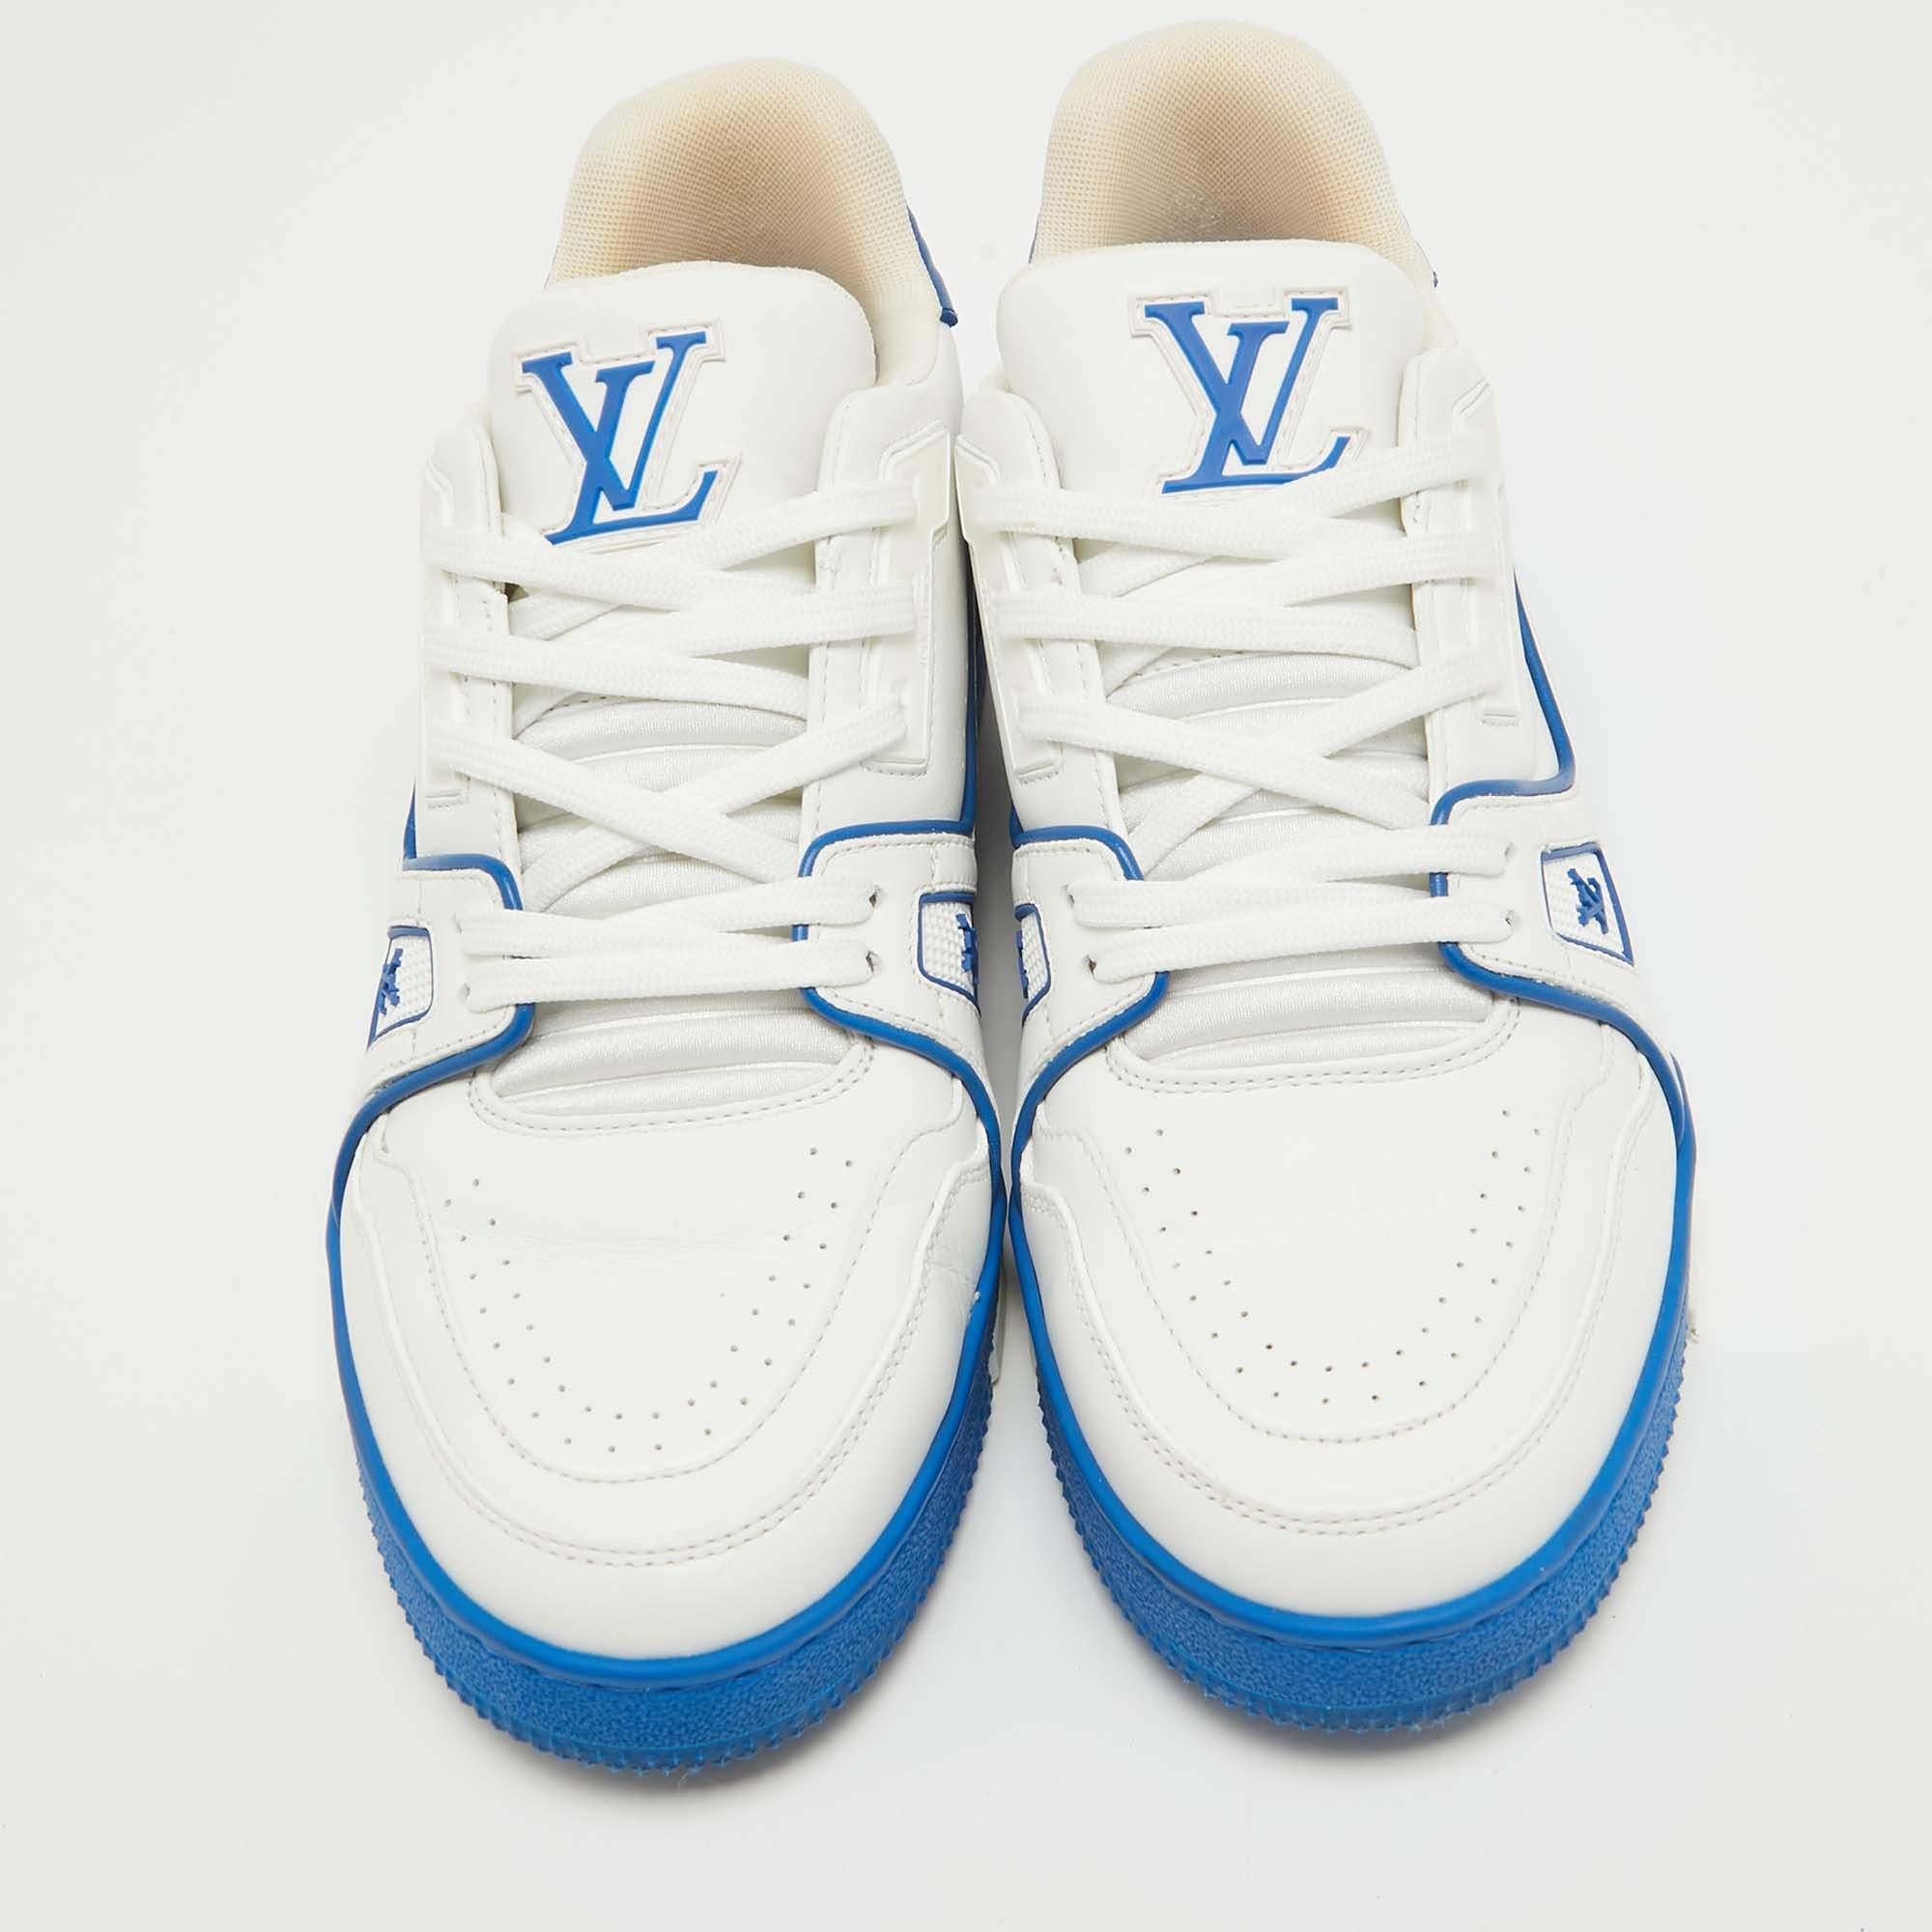 Don't miss out on making these Louis Vuitton sneakers yours this season. Crafted from leather, these white/blue sneakers feature lace-up vamps, rubber soles, and signature details.

